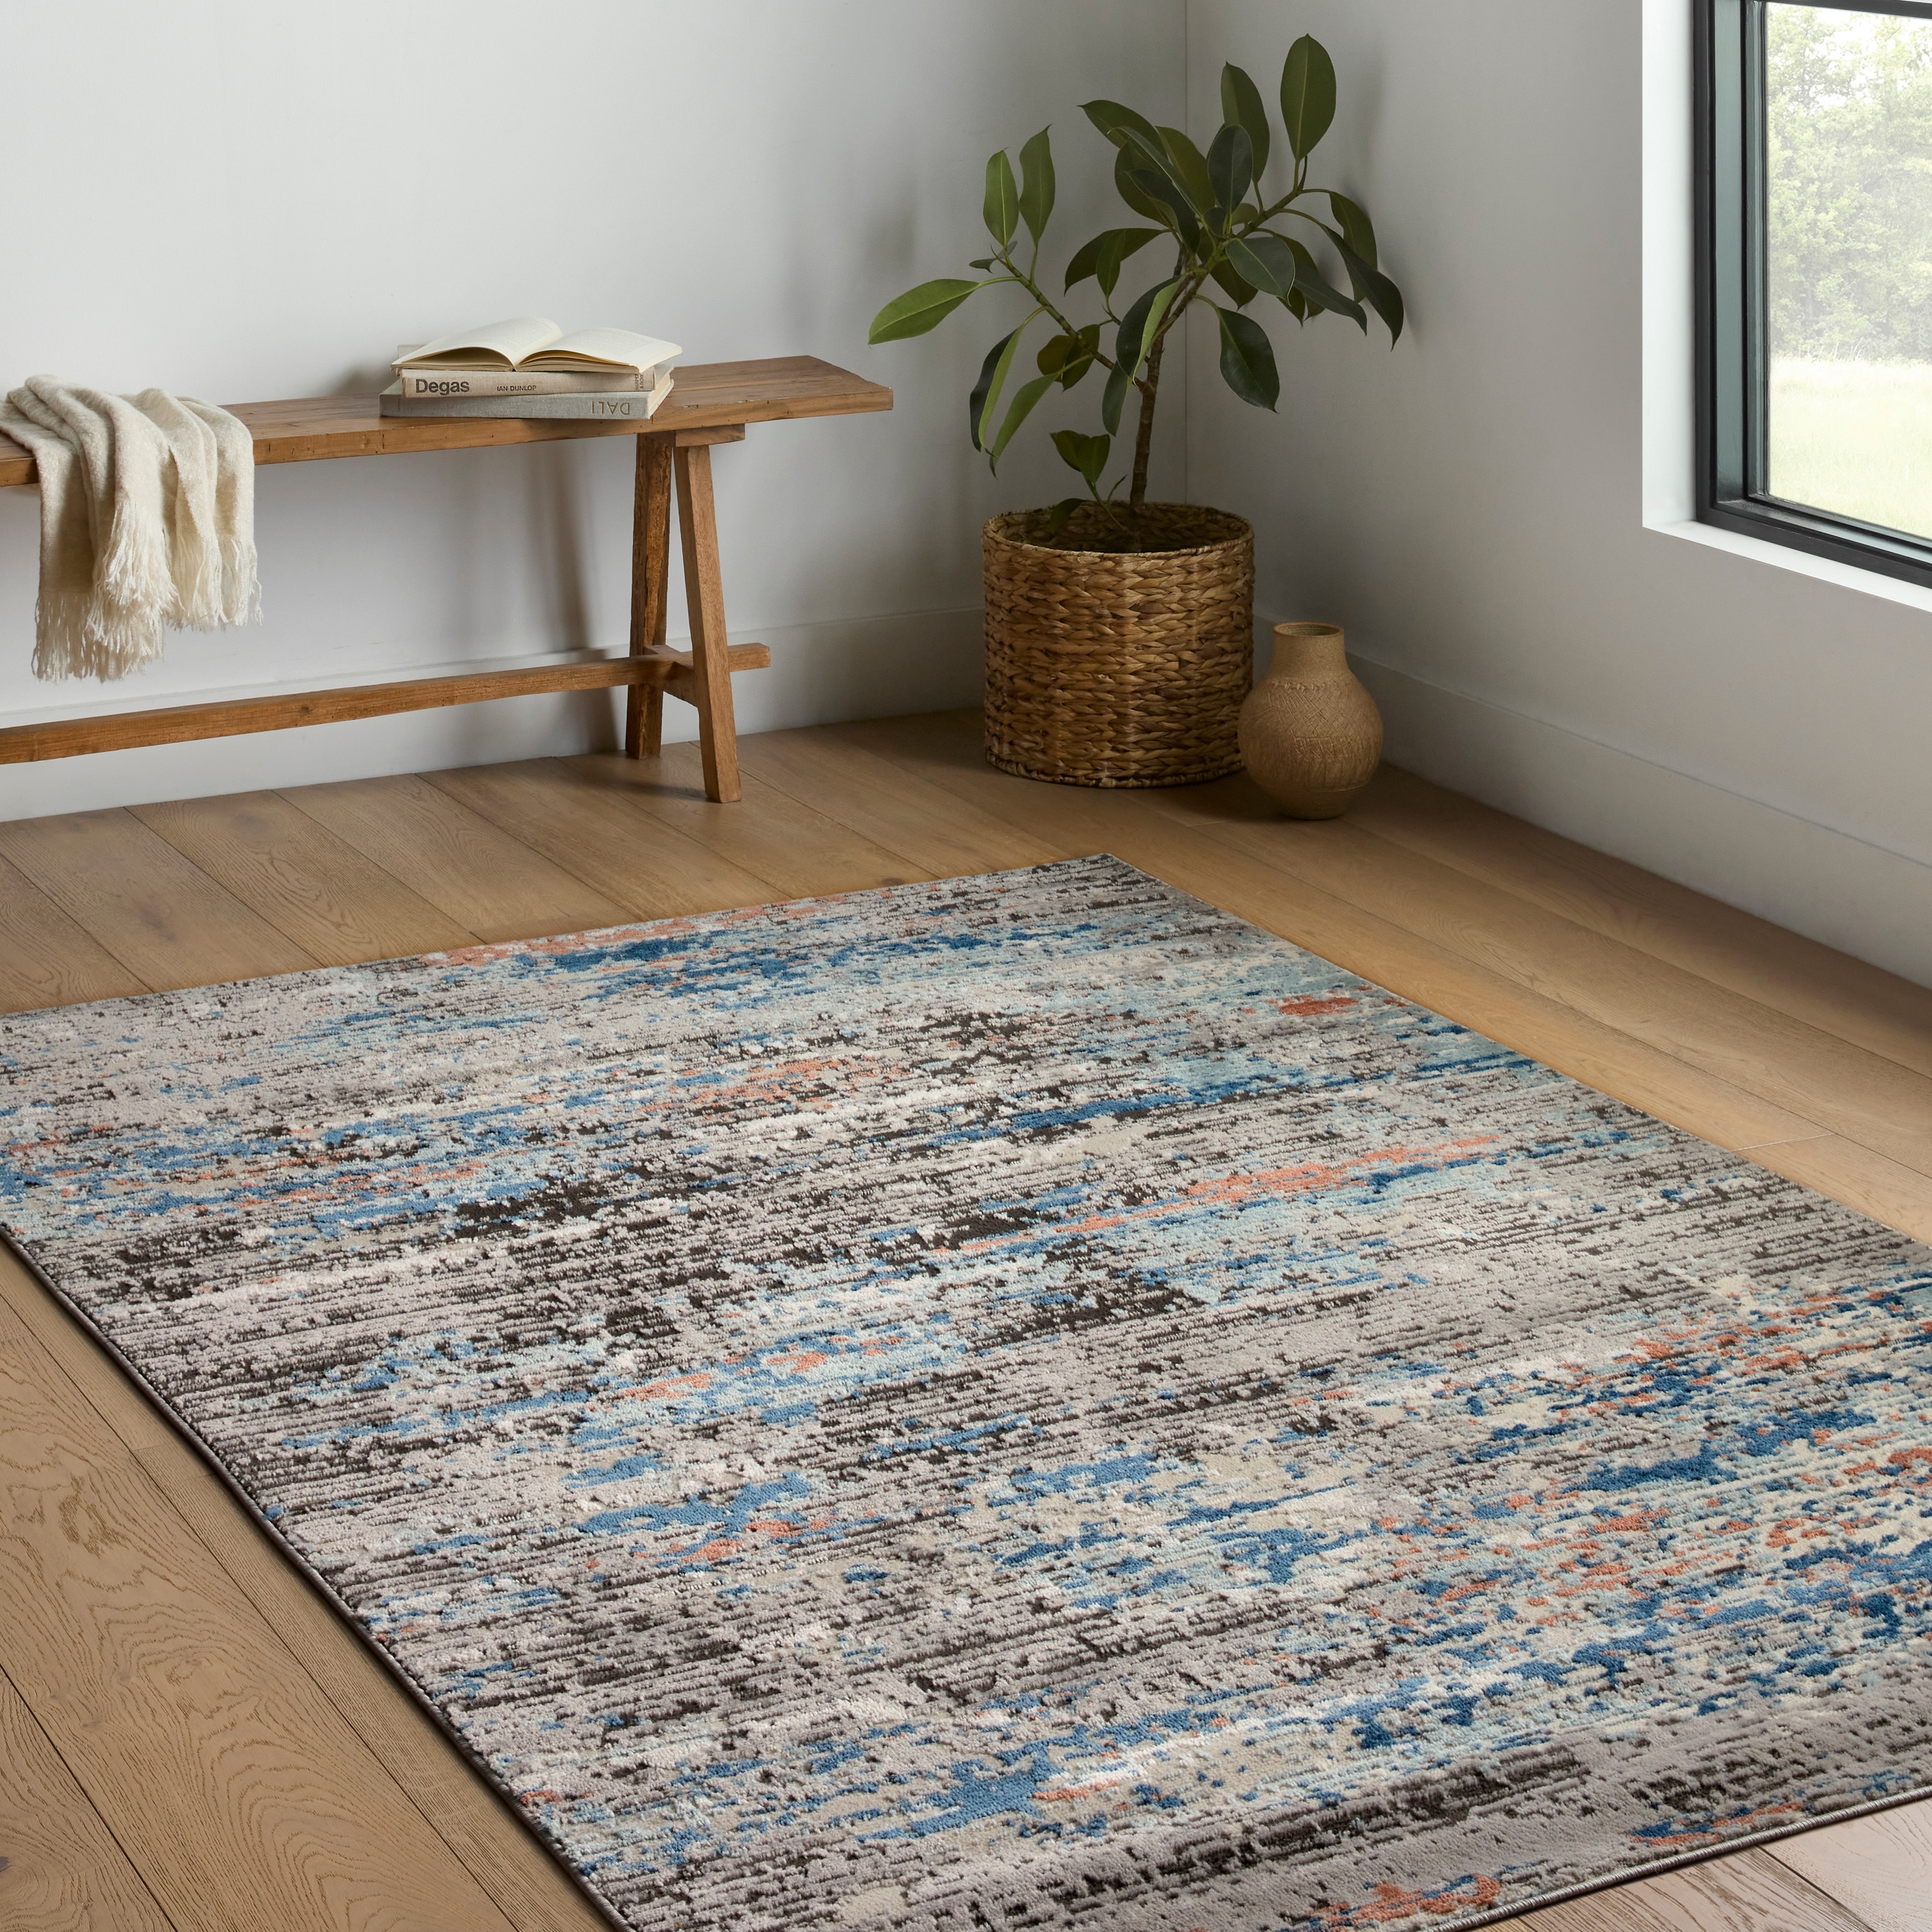 https://ak1.ostkcdn.com/images/products/is/images/direct/20fc22d4849a2ffdcbfaa2e068befe14a33587fc/Alexander-Home-Orleans-Abstract-Modern-Area-Rug.jpg